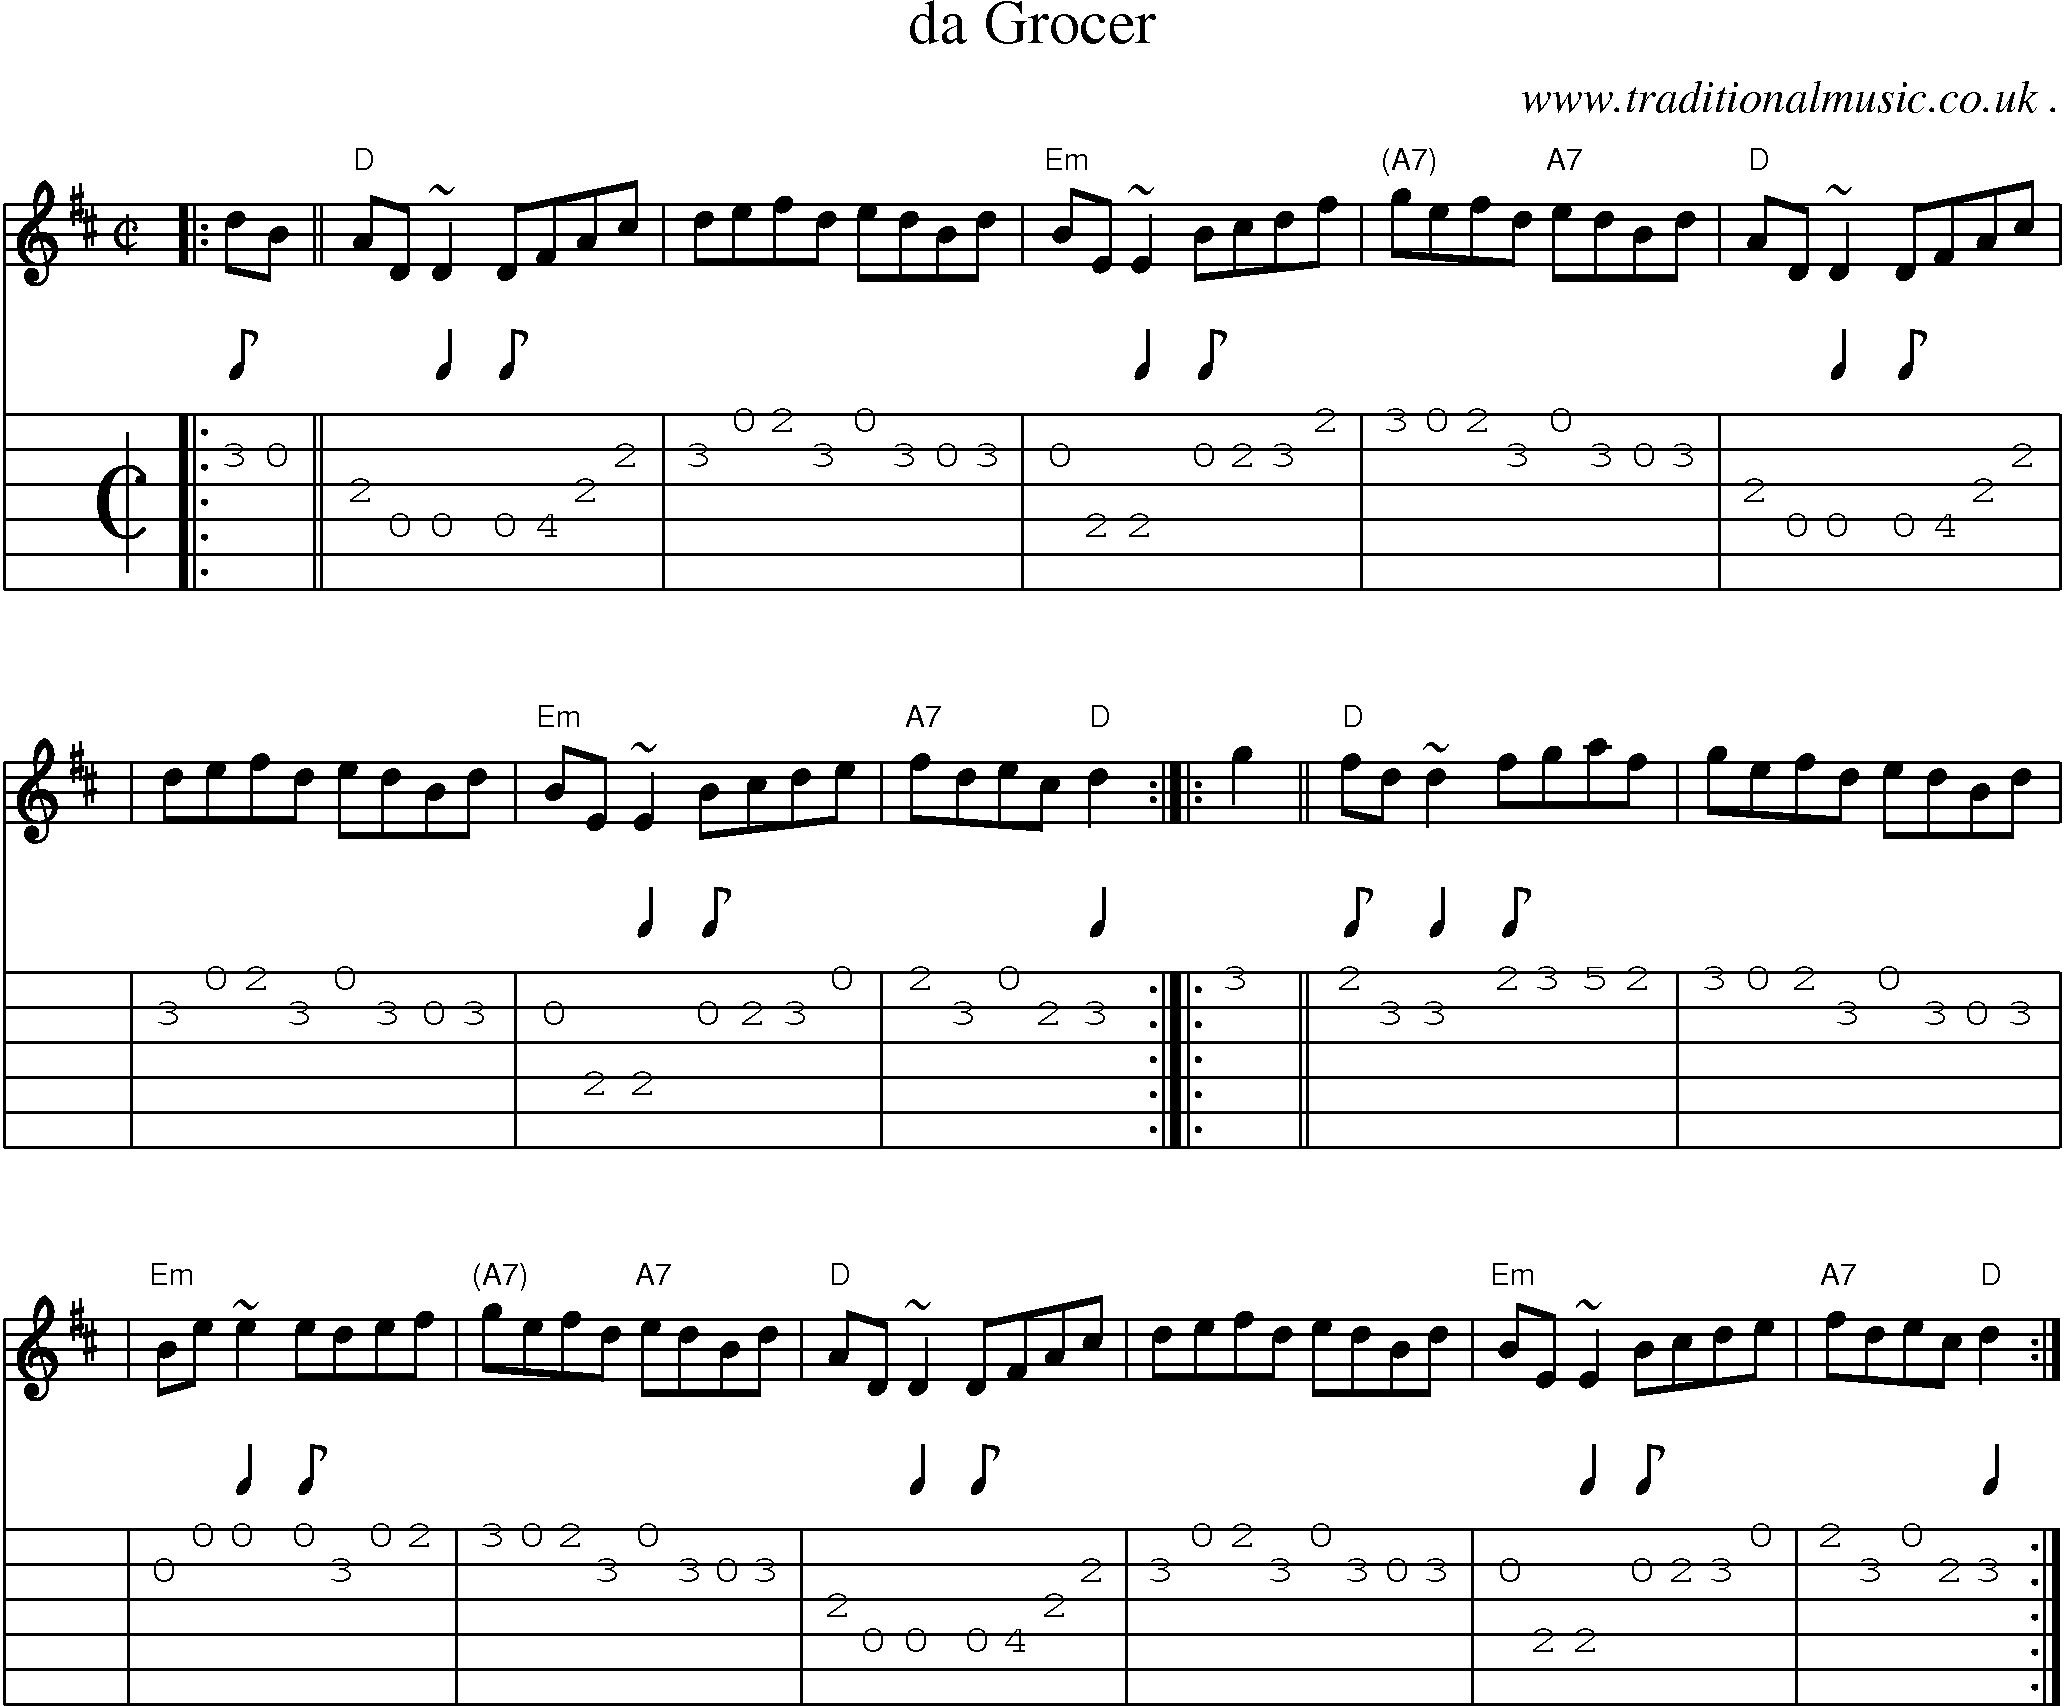 Sheet-music  score, Chords and Guitar Tabs for Da Grocer